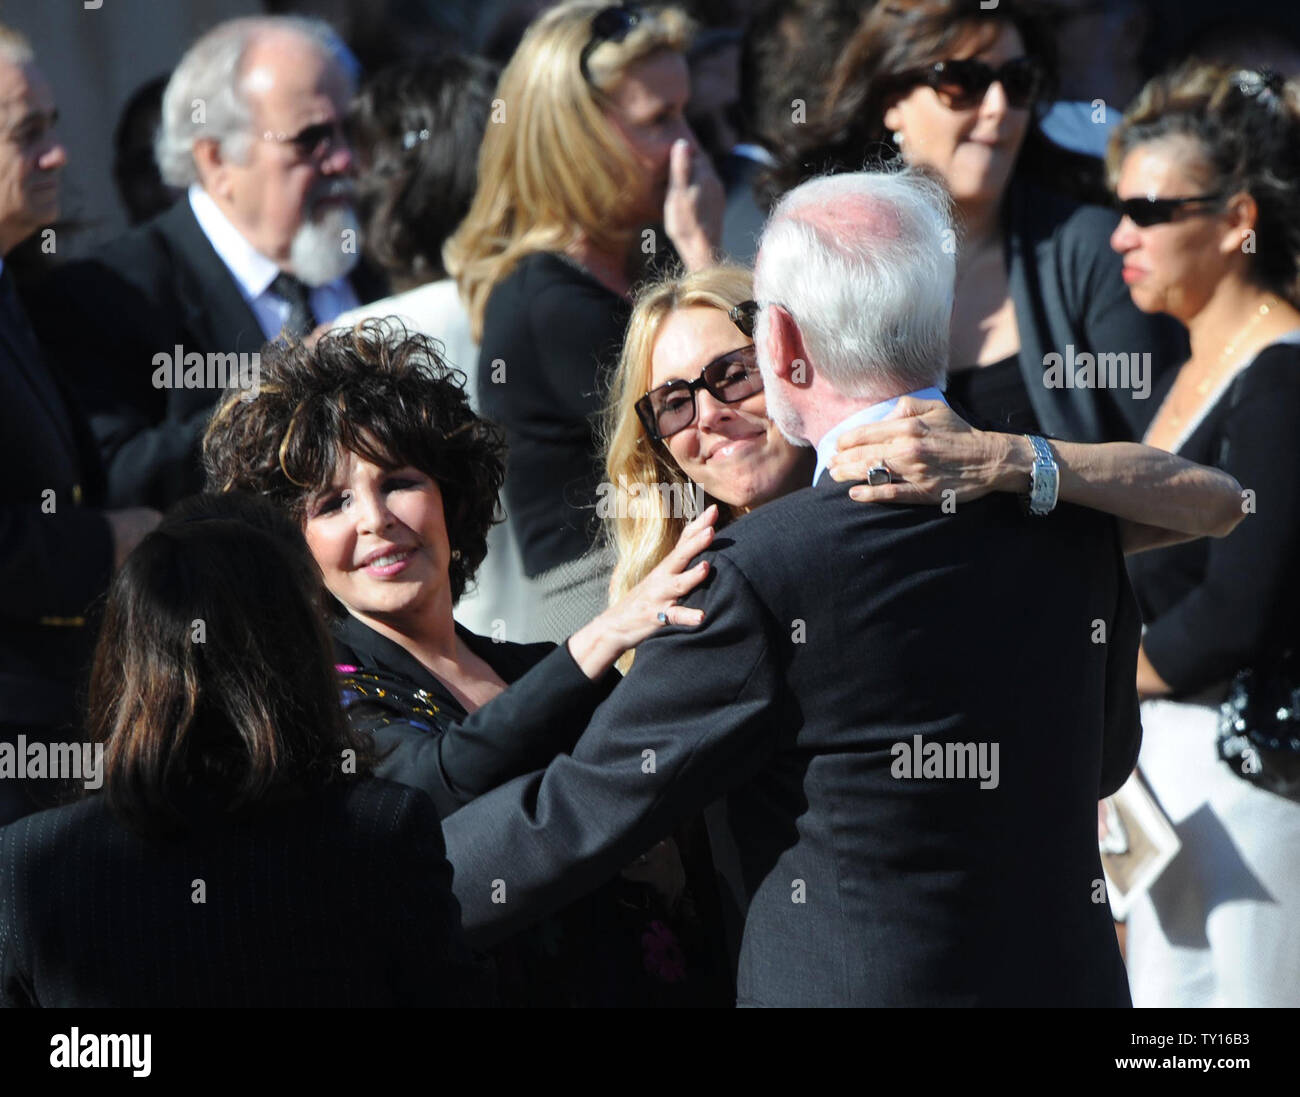 Alana Stewart (C) best friend of late actress Farrah Fawcett hugs Leonard Goldberg, producer of Fawcett's TV series 'Charlie's Angels' as songwriter Carole Bayer Sager (L) looks on following Fawcett's funeral at the Cathedral of Our Lady of Angels in Los Angeles June 30, 2009. (UPI Photo/Jim Ruymen) Stock Photo